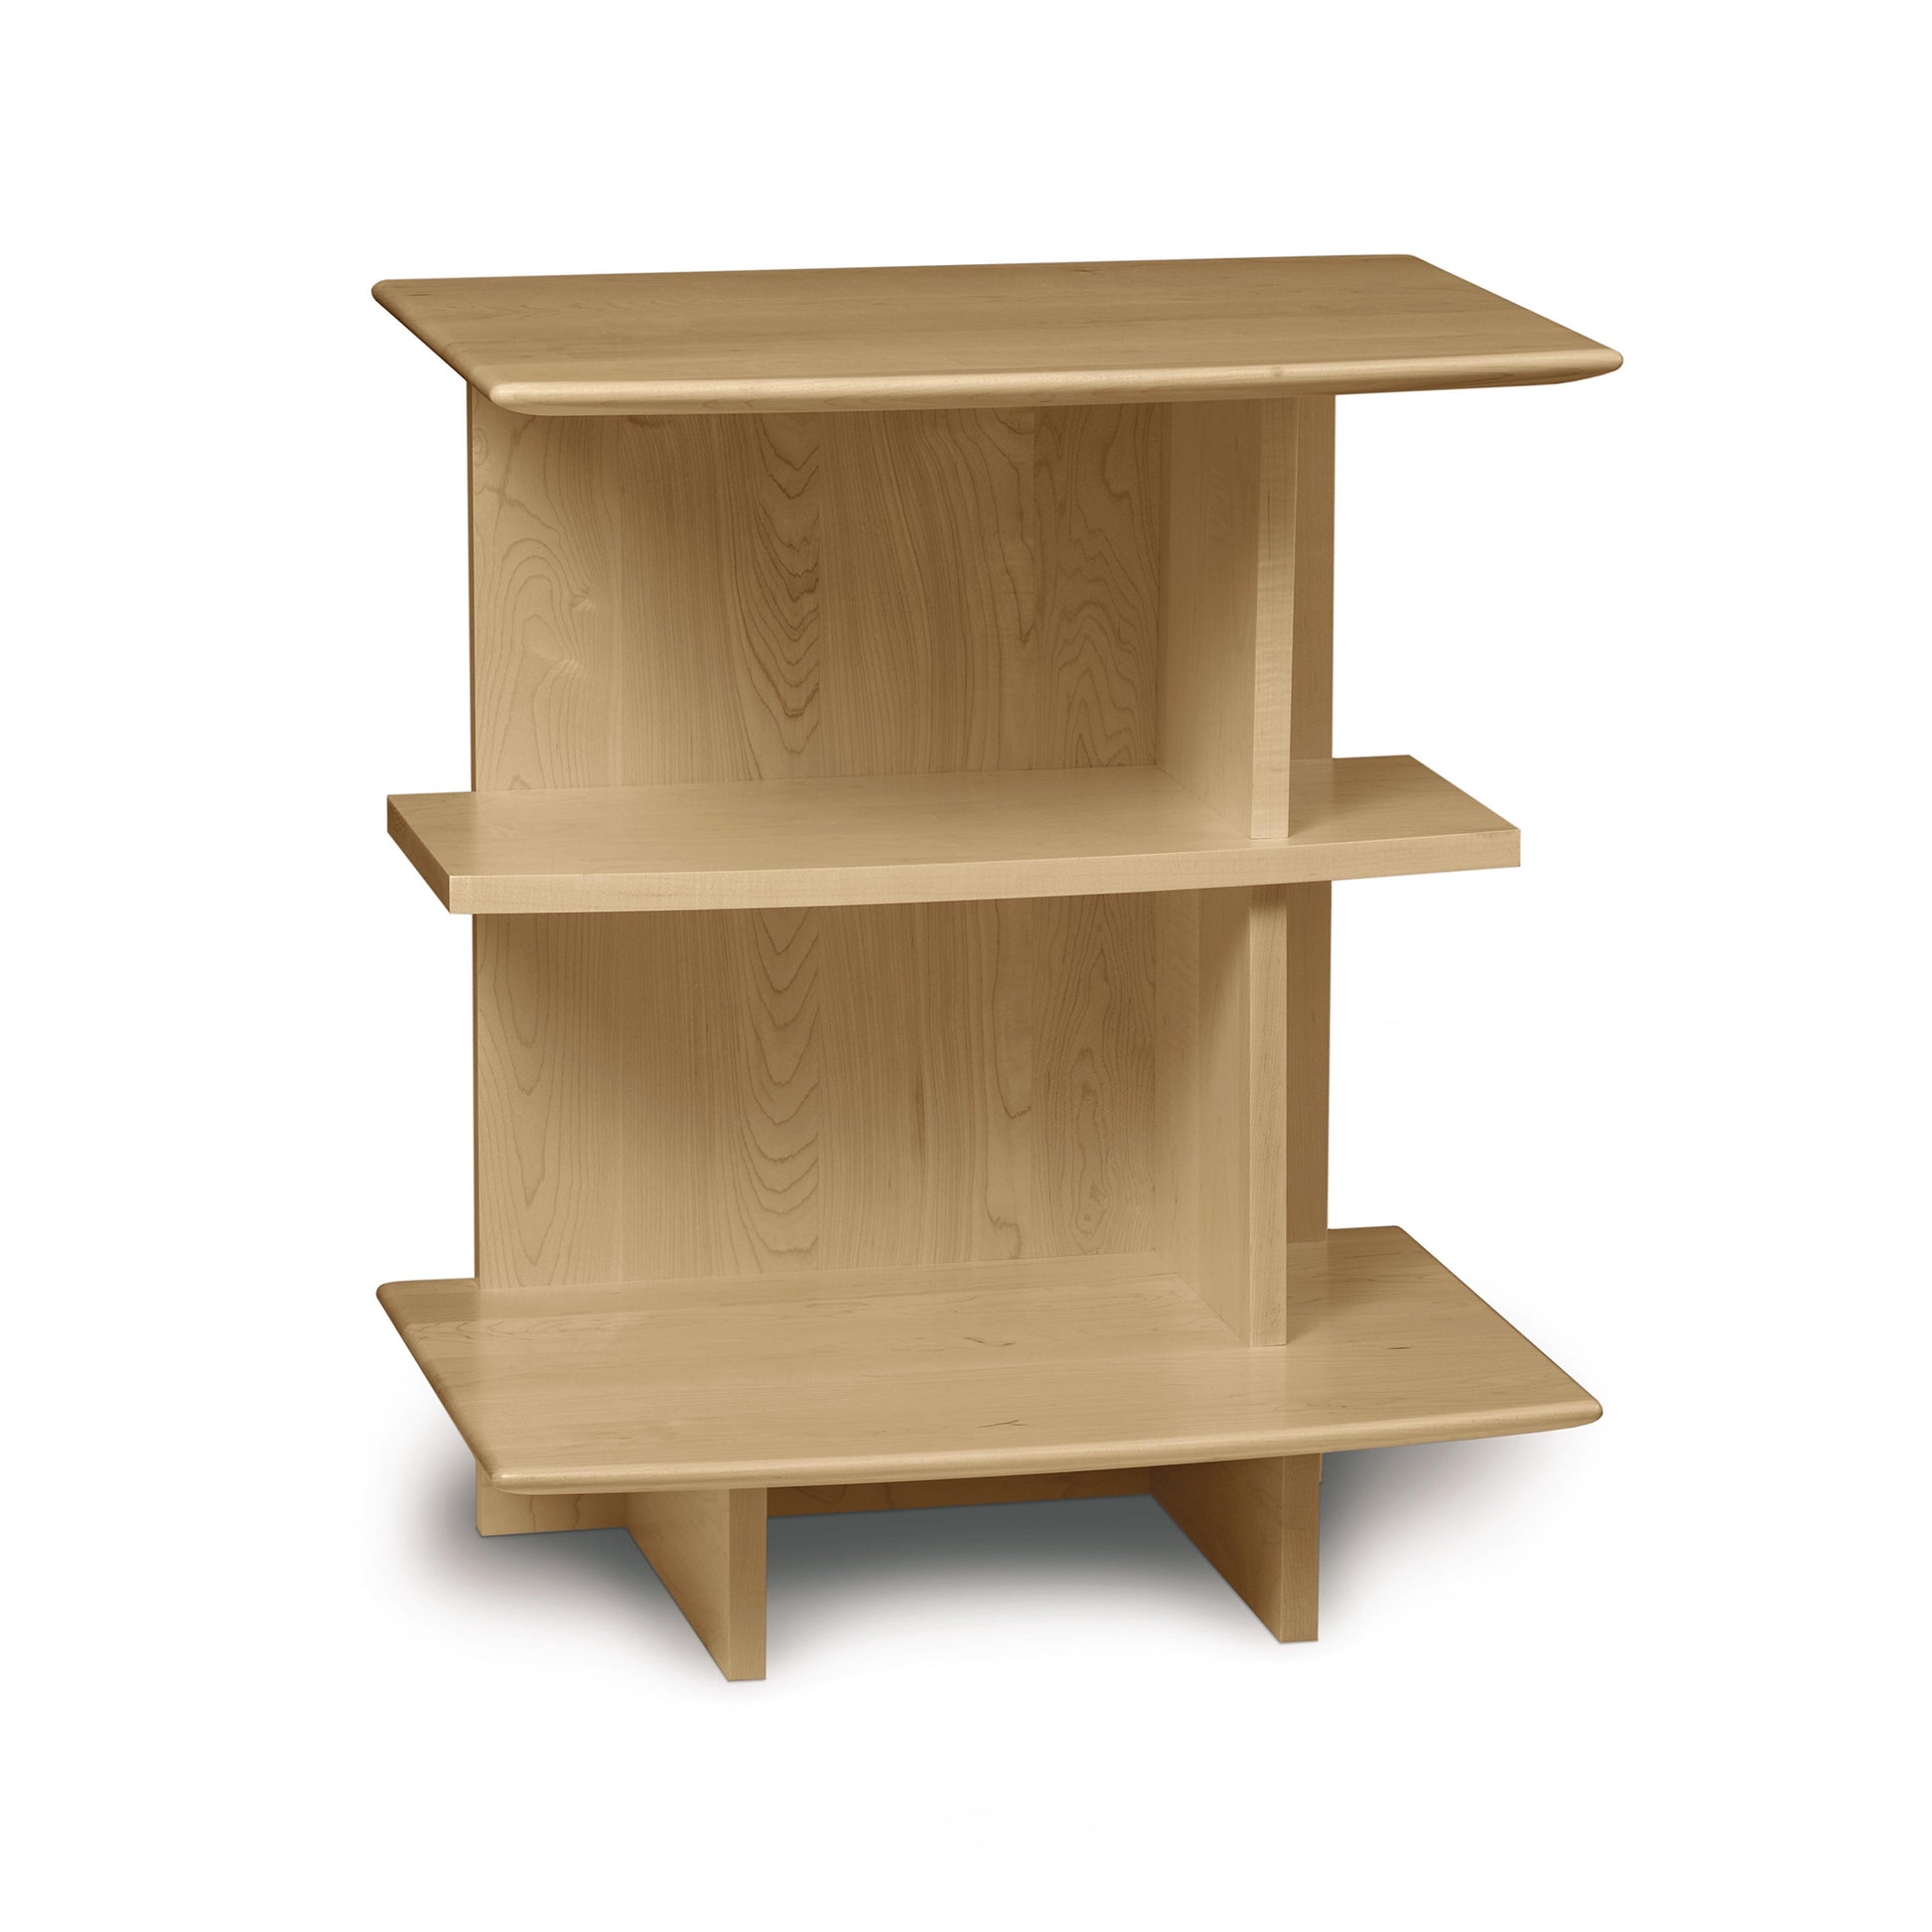 A small wooden Sarah Open Shelf Nightstand from Copeland Furniture on a white background, featuring the Copeland's Sarah solid wood design.